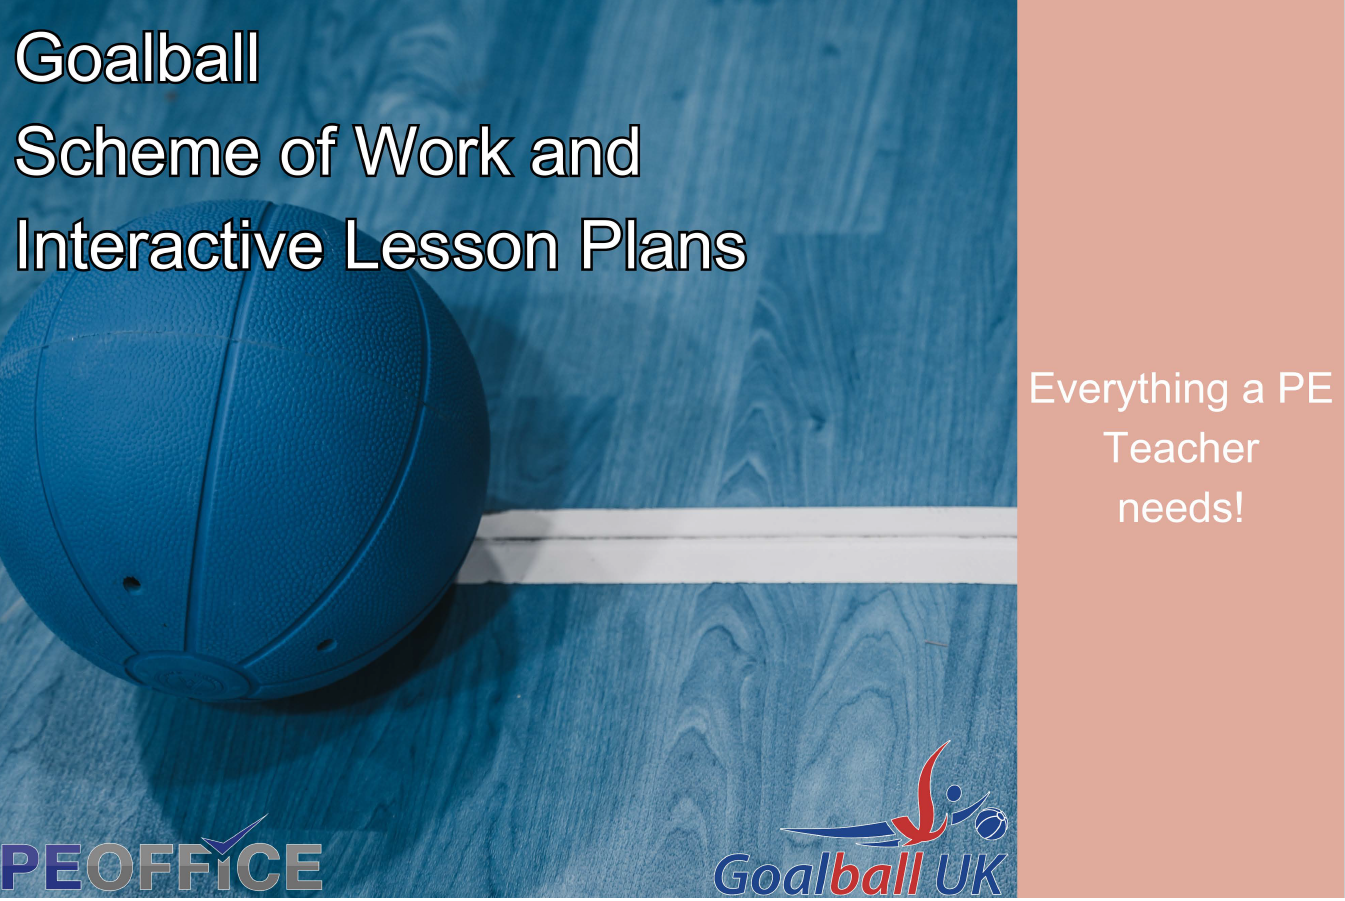 Goalball Scheme of Work Lesson Plans and Resources